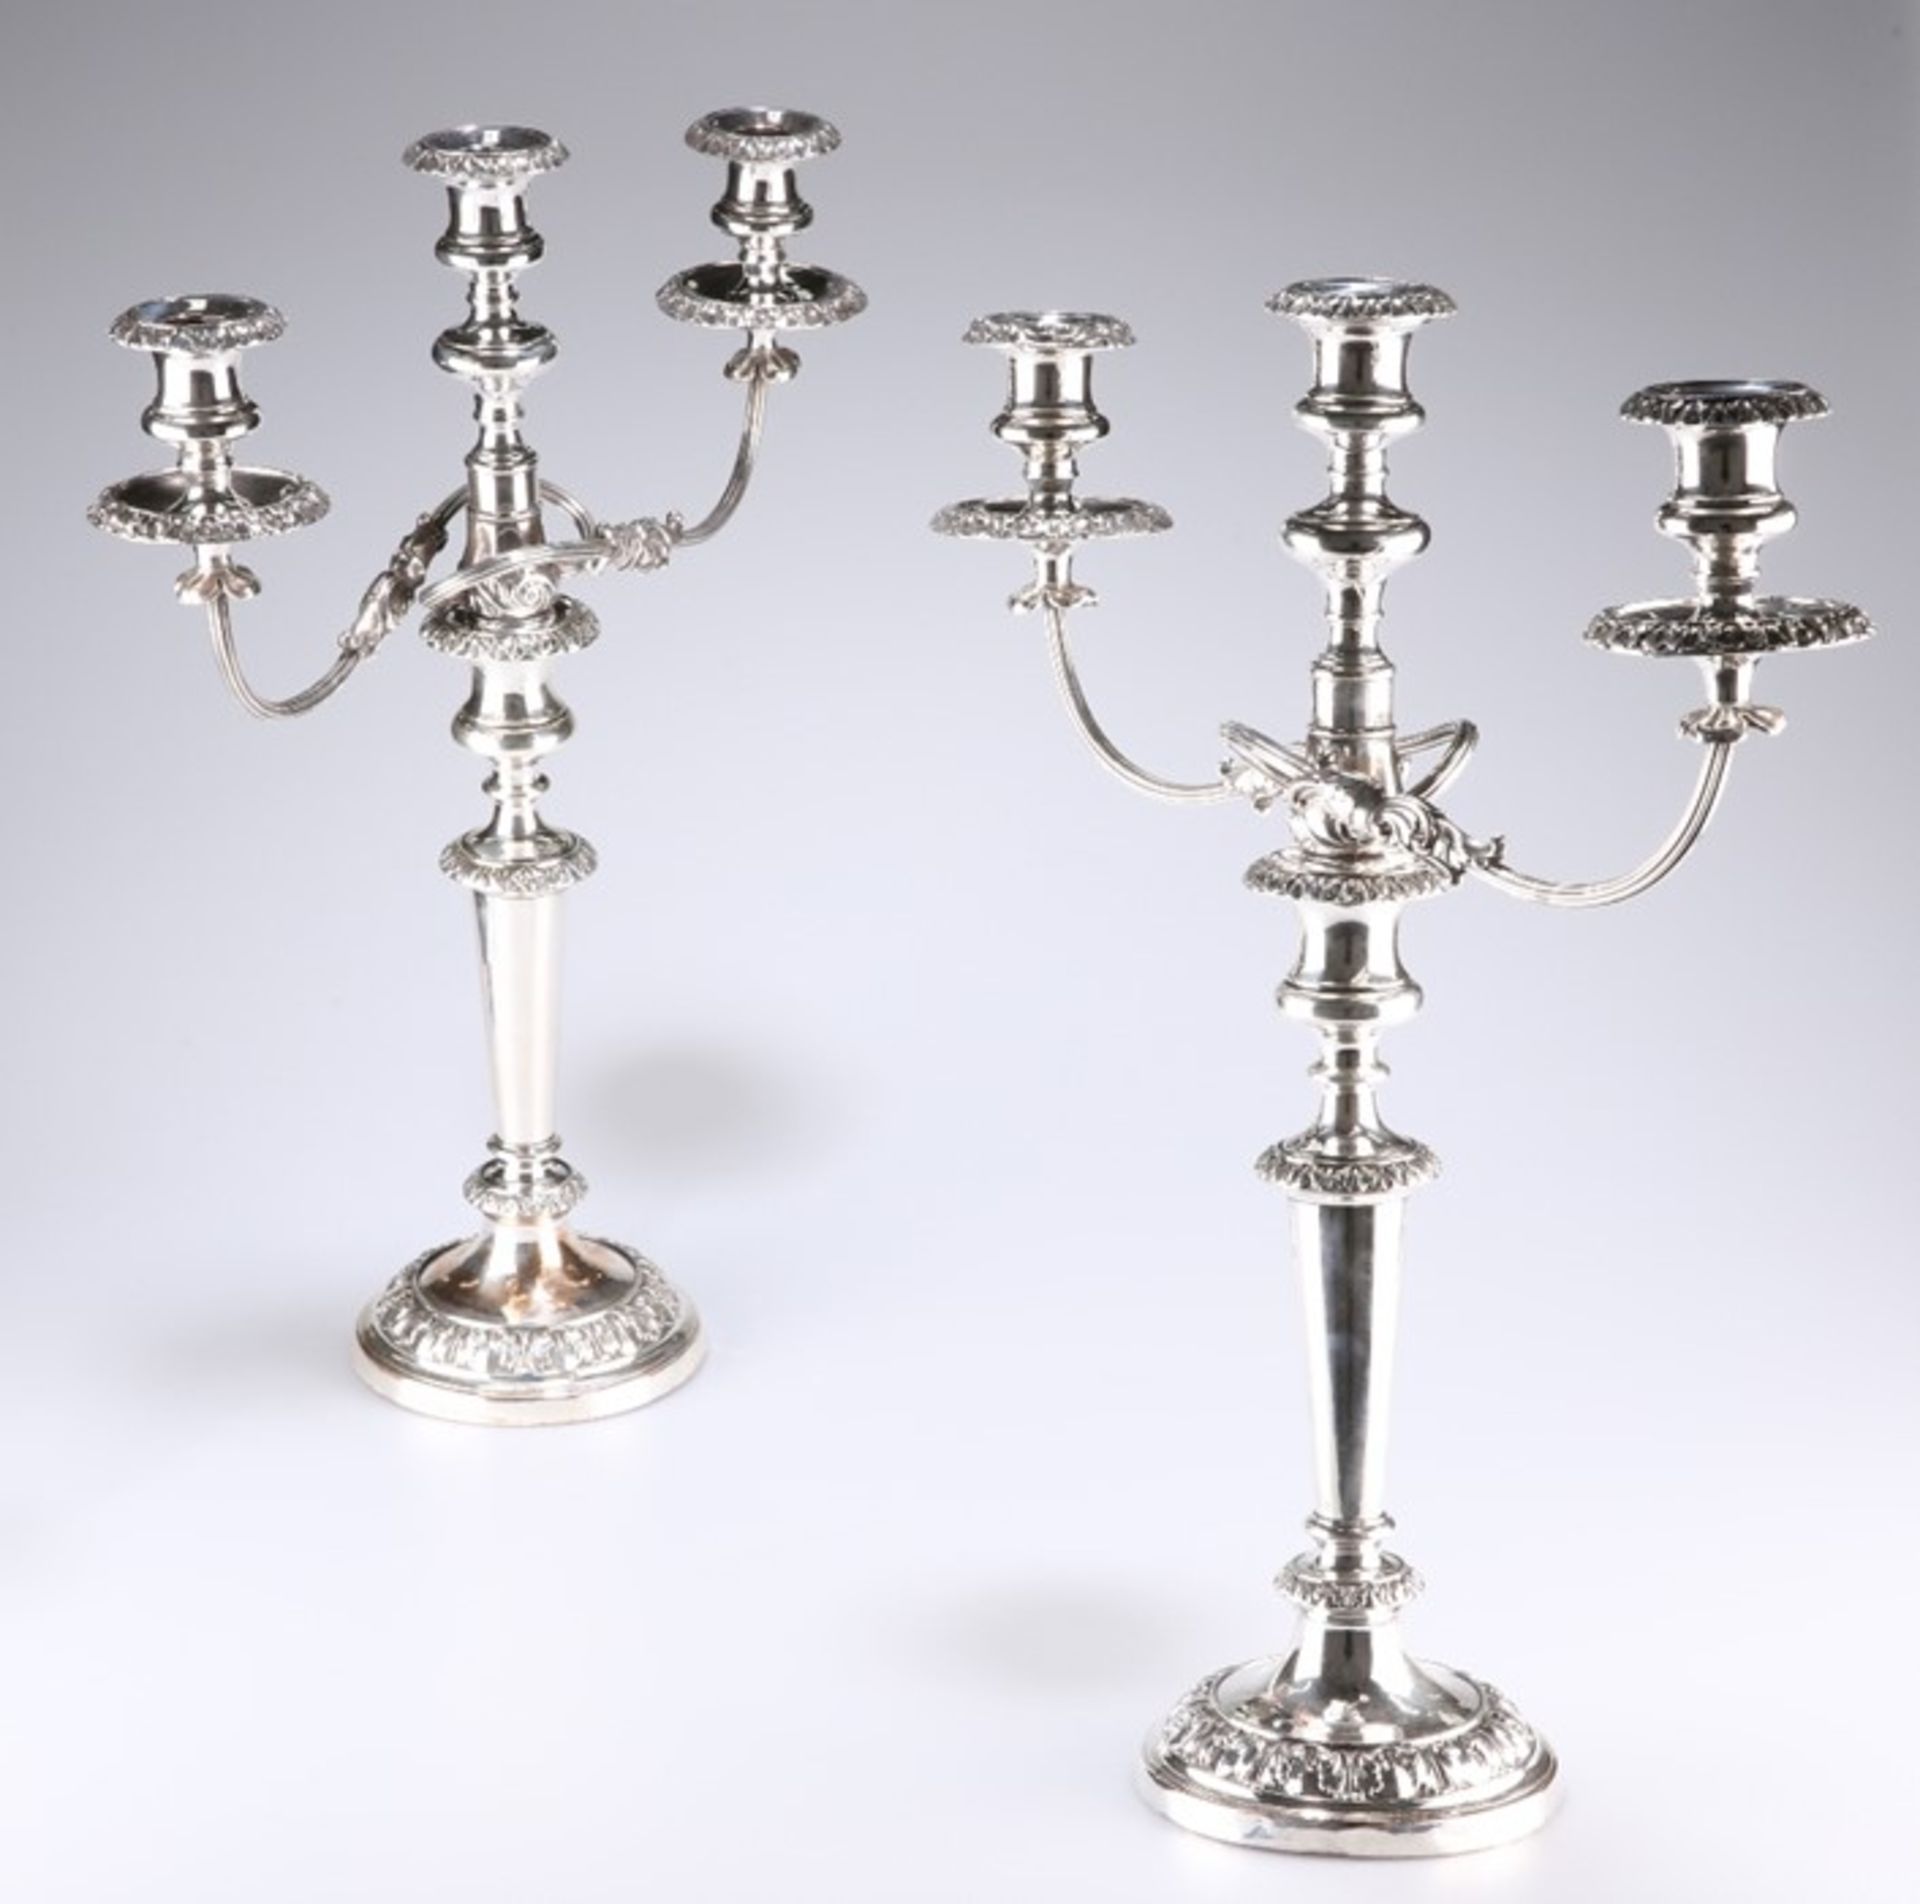 A LARGE PAIR OF 19TH CENTURY SILVER-PLATED (ON COPPER) CANDELABRA